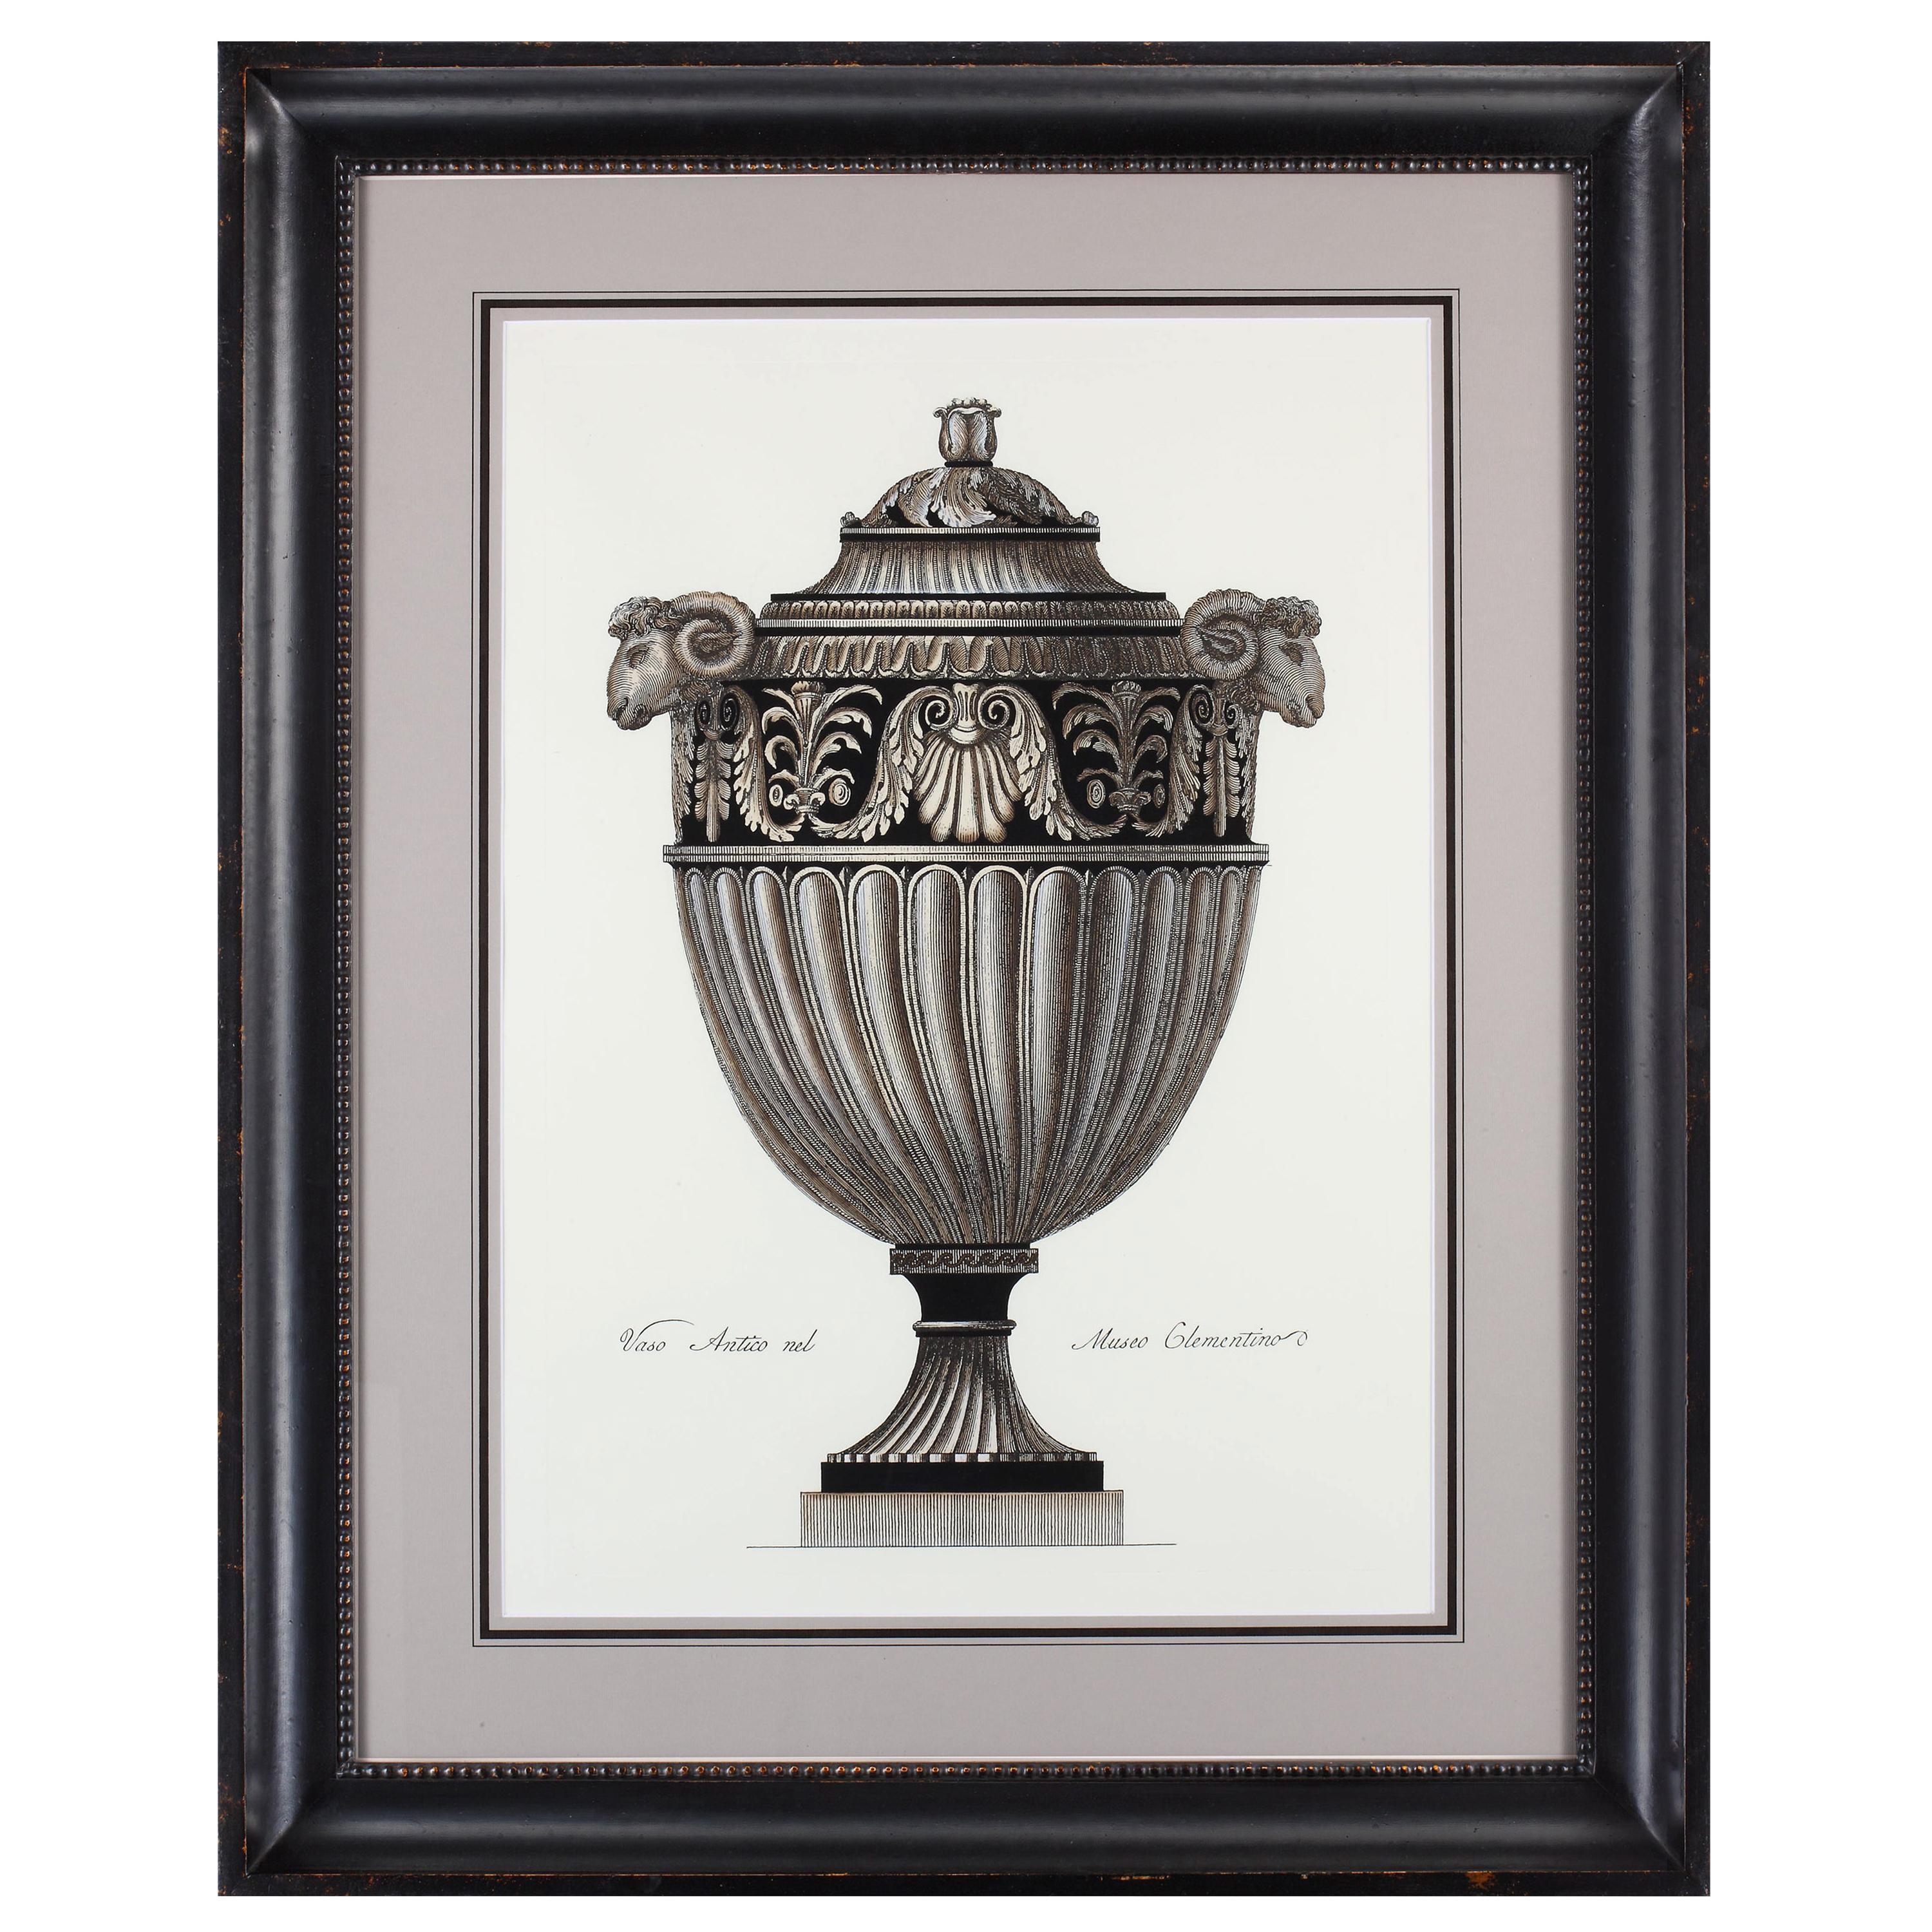 Contemporary Italian hand coloured Roman vase print with handcrafted black frame